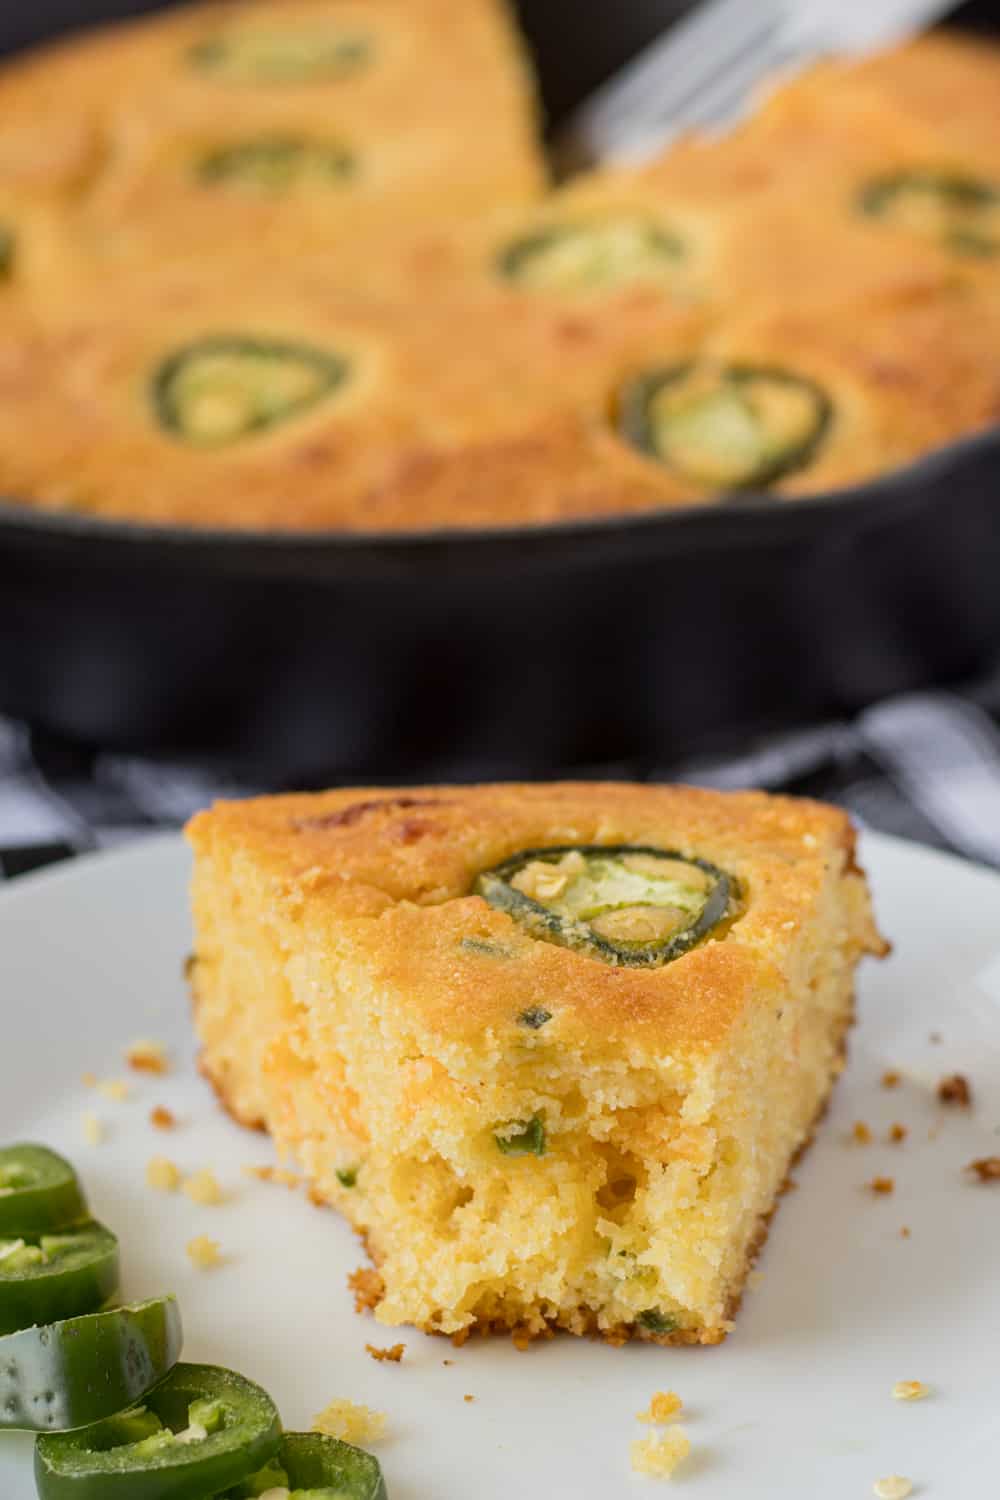 Jalapeno cornbread made in a cast iron skillet.